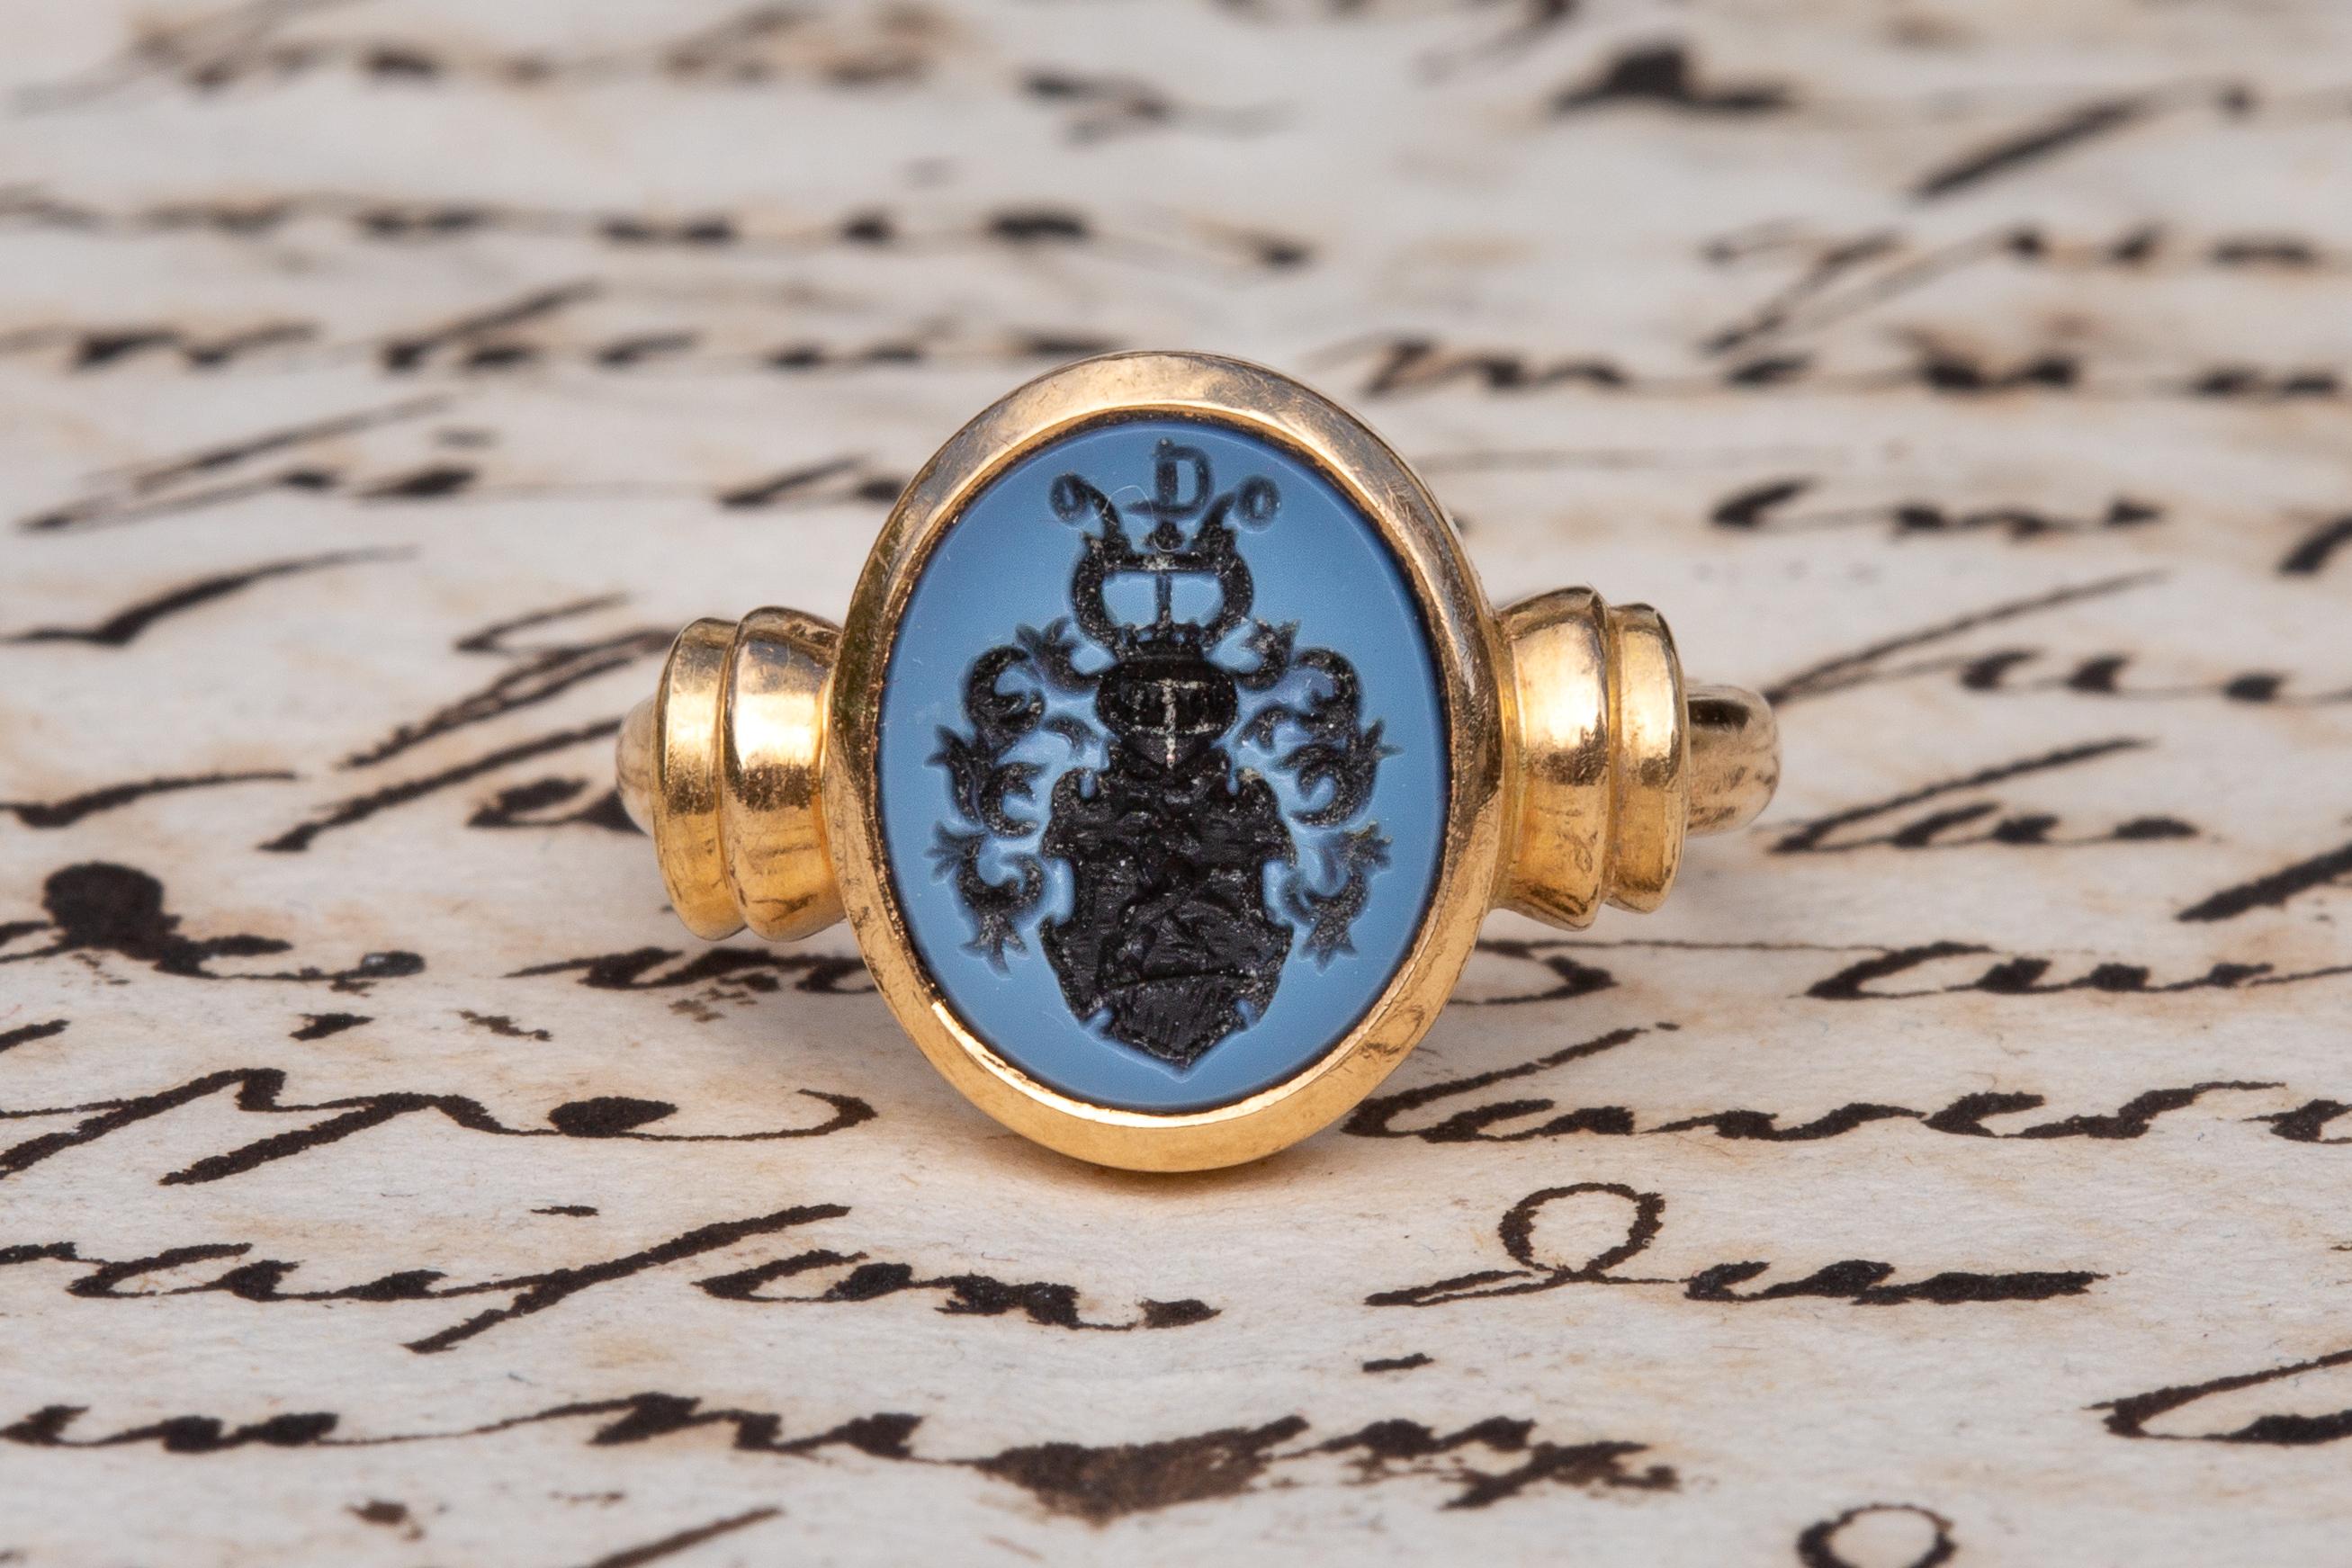 This beautiful vintage intaglio signet ring was made in 1992 in Stockholm by Swedish jeweller Bertil Nilsson. It is crafted in 18K yellow gold and features a blue-black agate stone which is intricately engraved with a heraldic coat of arms.

The